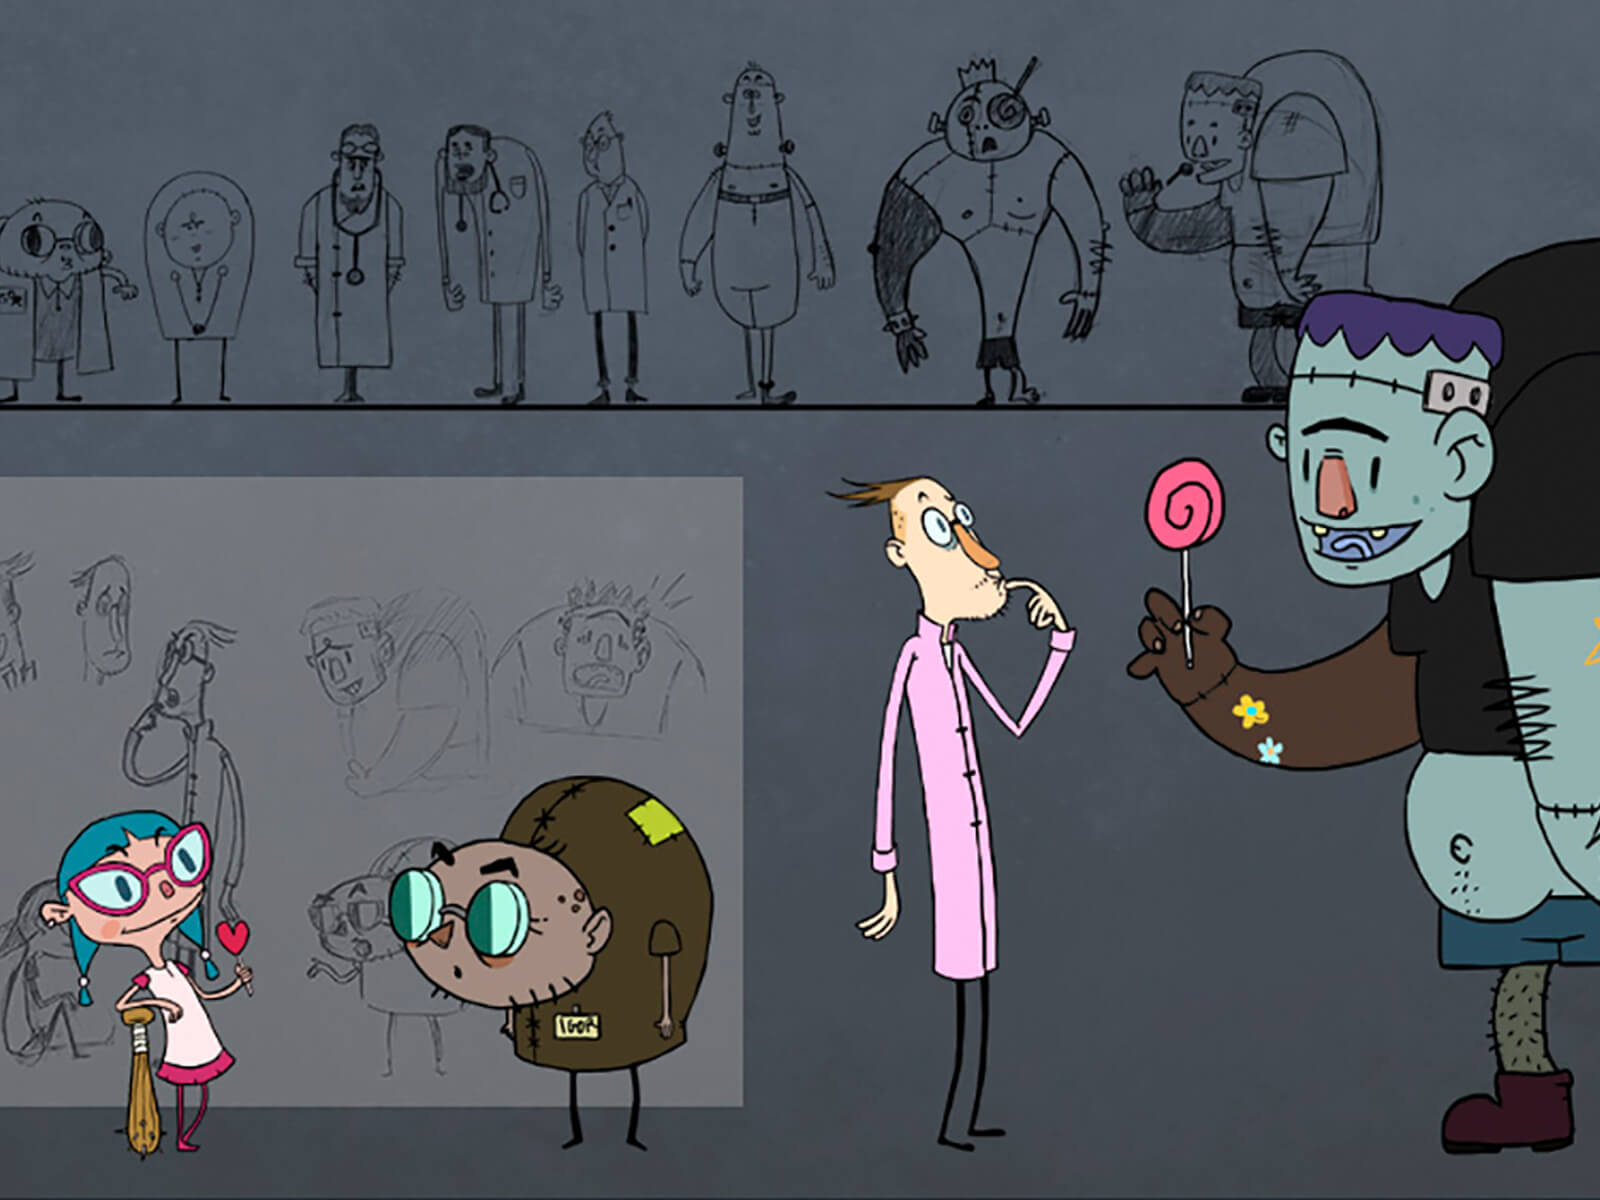 Concept sketches of a young girl, a scientist and his short assistant, and a friendly Frankenstein Monster holding a lollipop